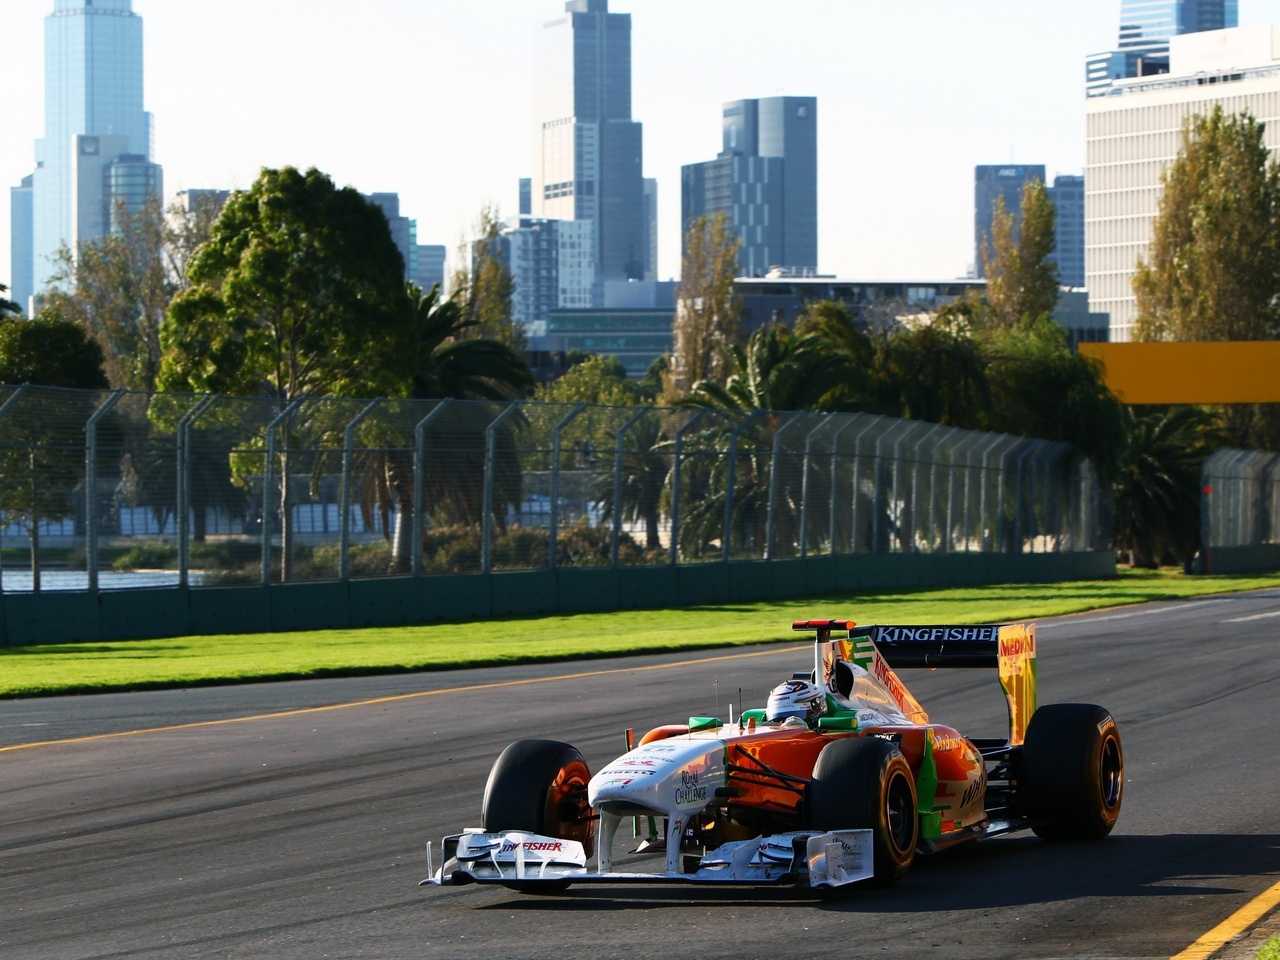 force india, F1, 2011, australiangp, andrian sutil, -, 